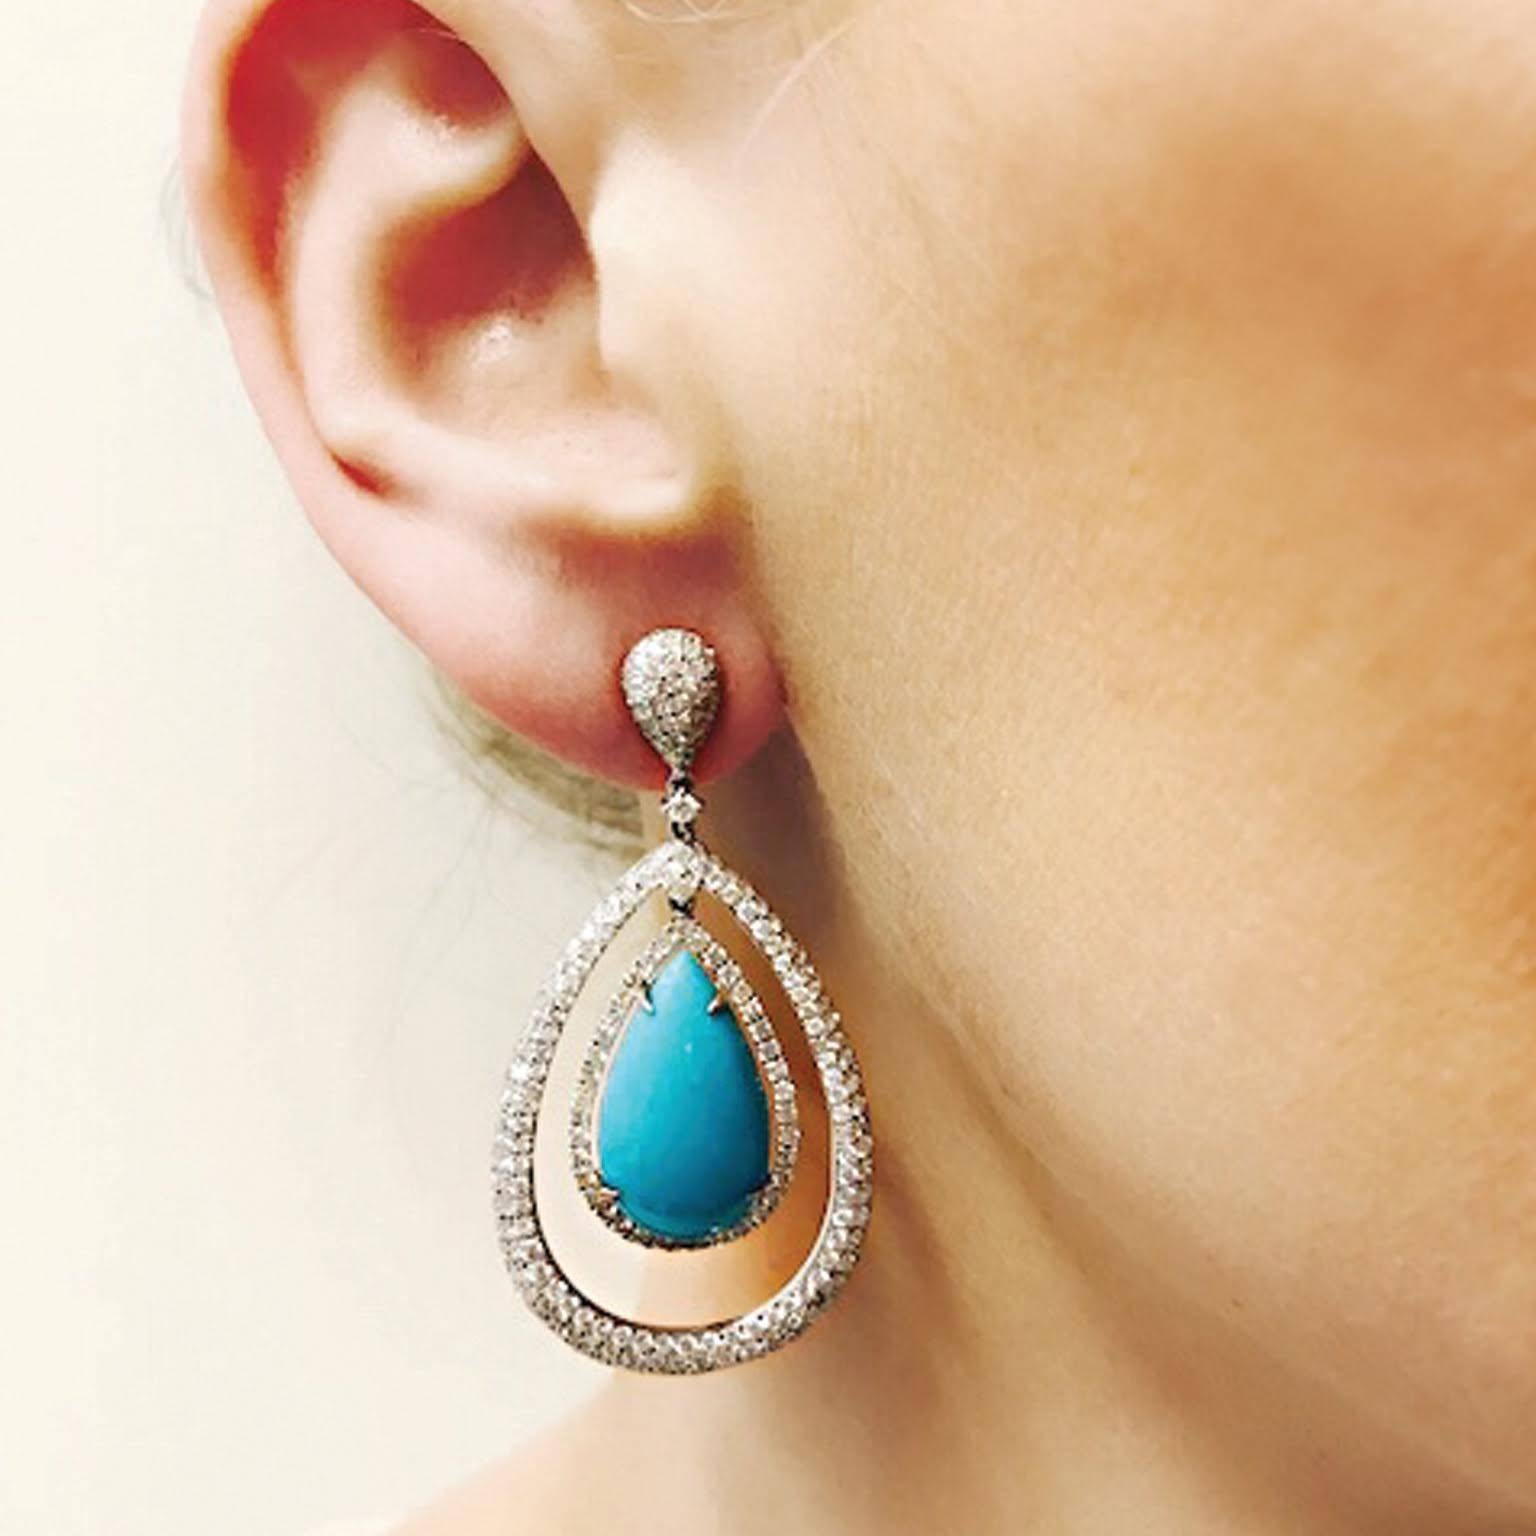 These stunning pear shaped Turquoise and Diamond Pave Earrings are an extreme classic.  Post Earring with butterfly clutch back.

Diamond-  approx. 3.99ct
Turquoise - approx. 13.61ct

48mm in Length